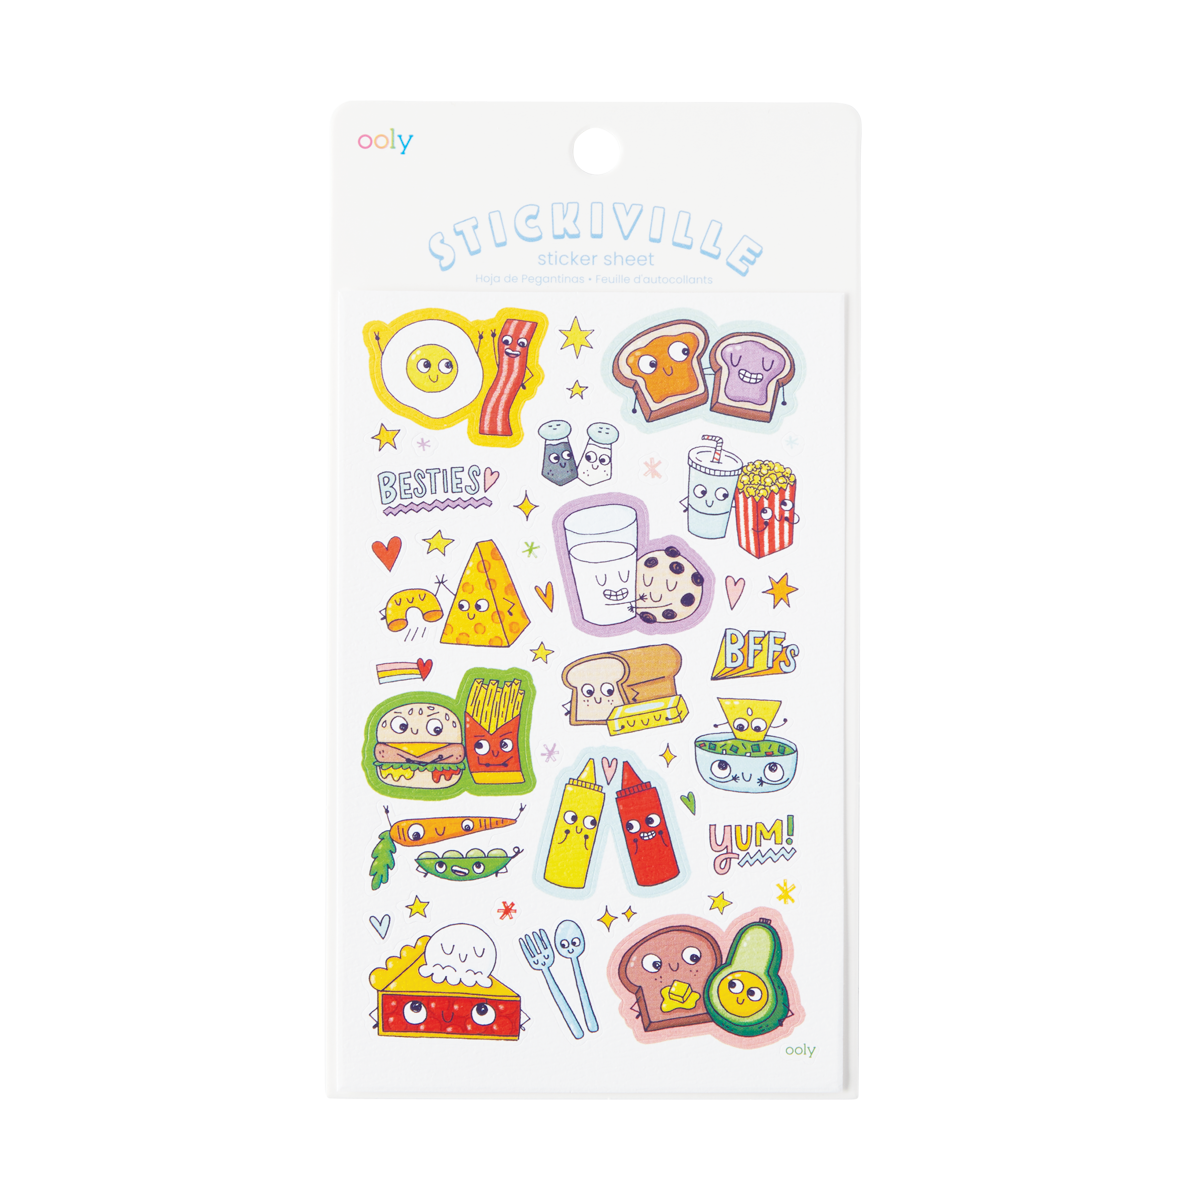 OOLY Stickiville BFF Foods stickers inside of packaging